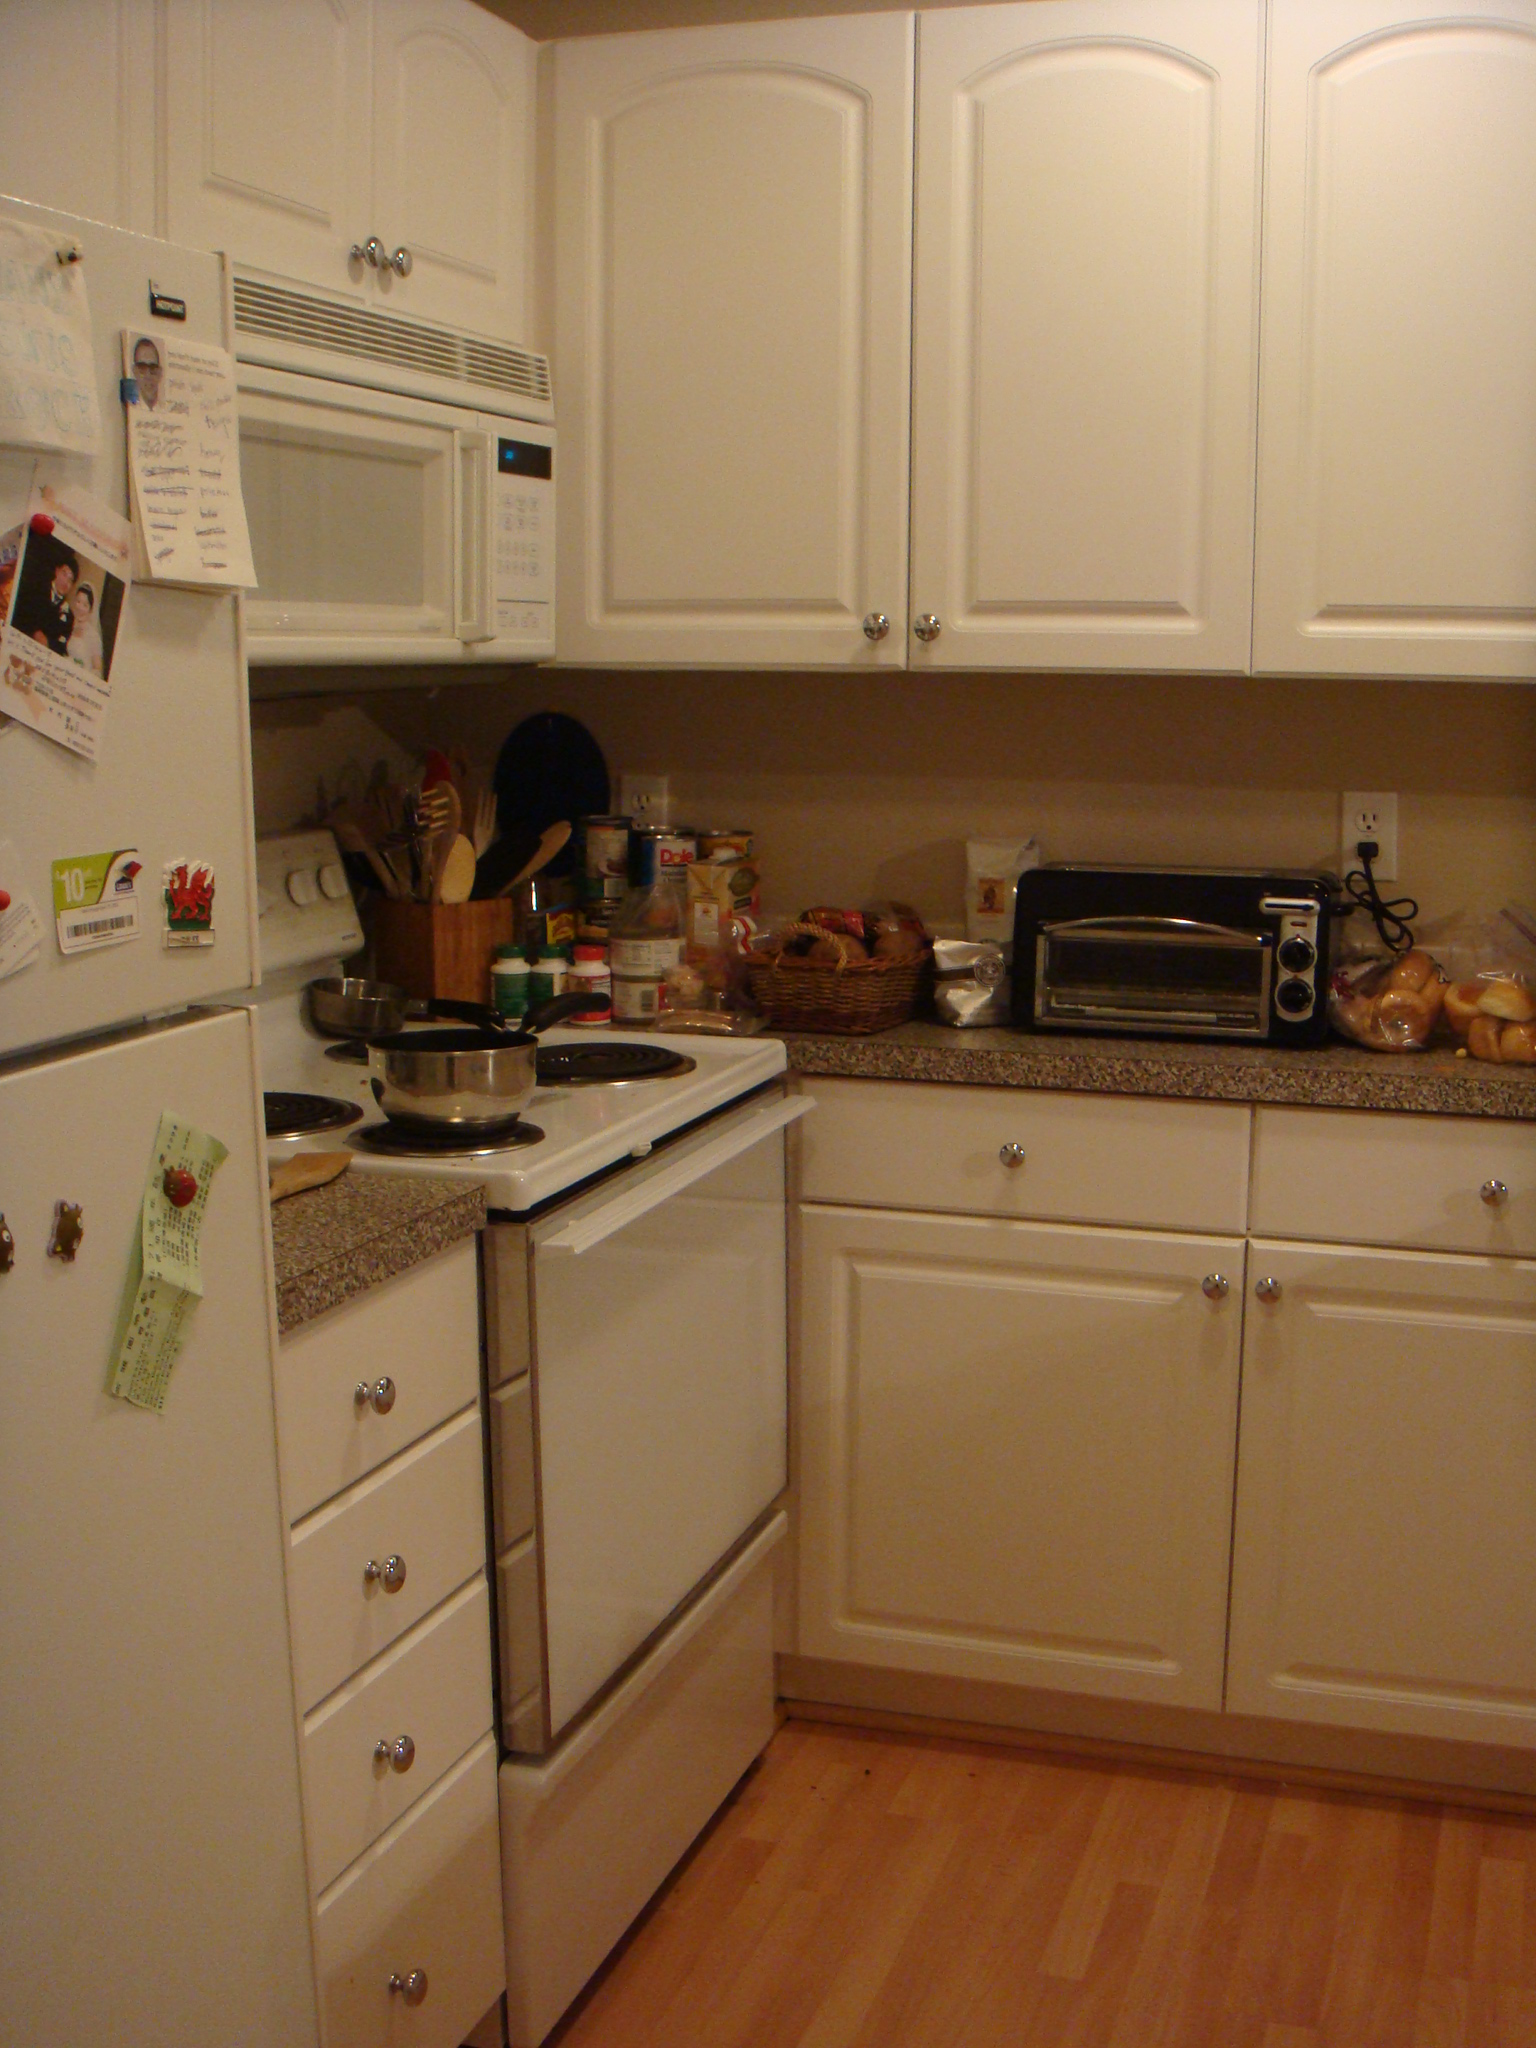 a kitchen has all white cabinets, wood floors, and wood flooring